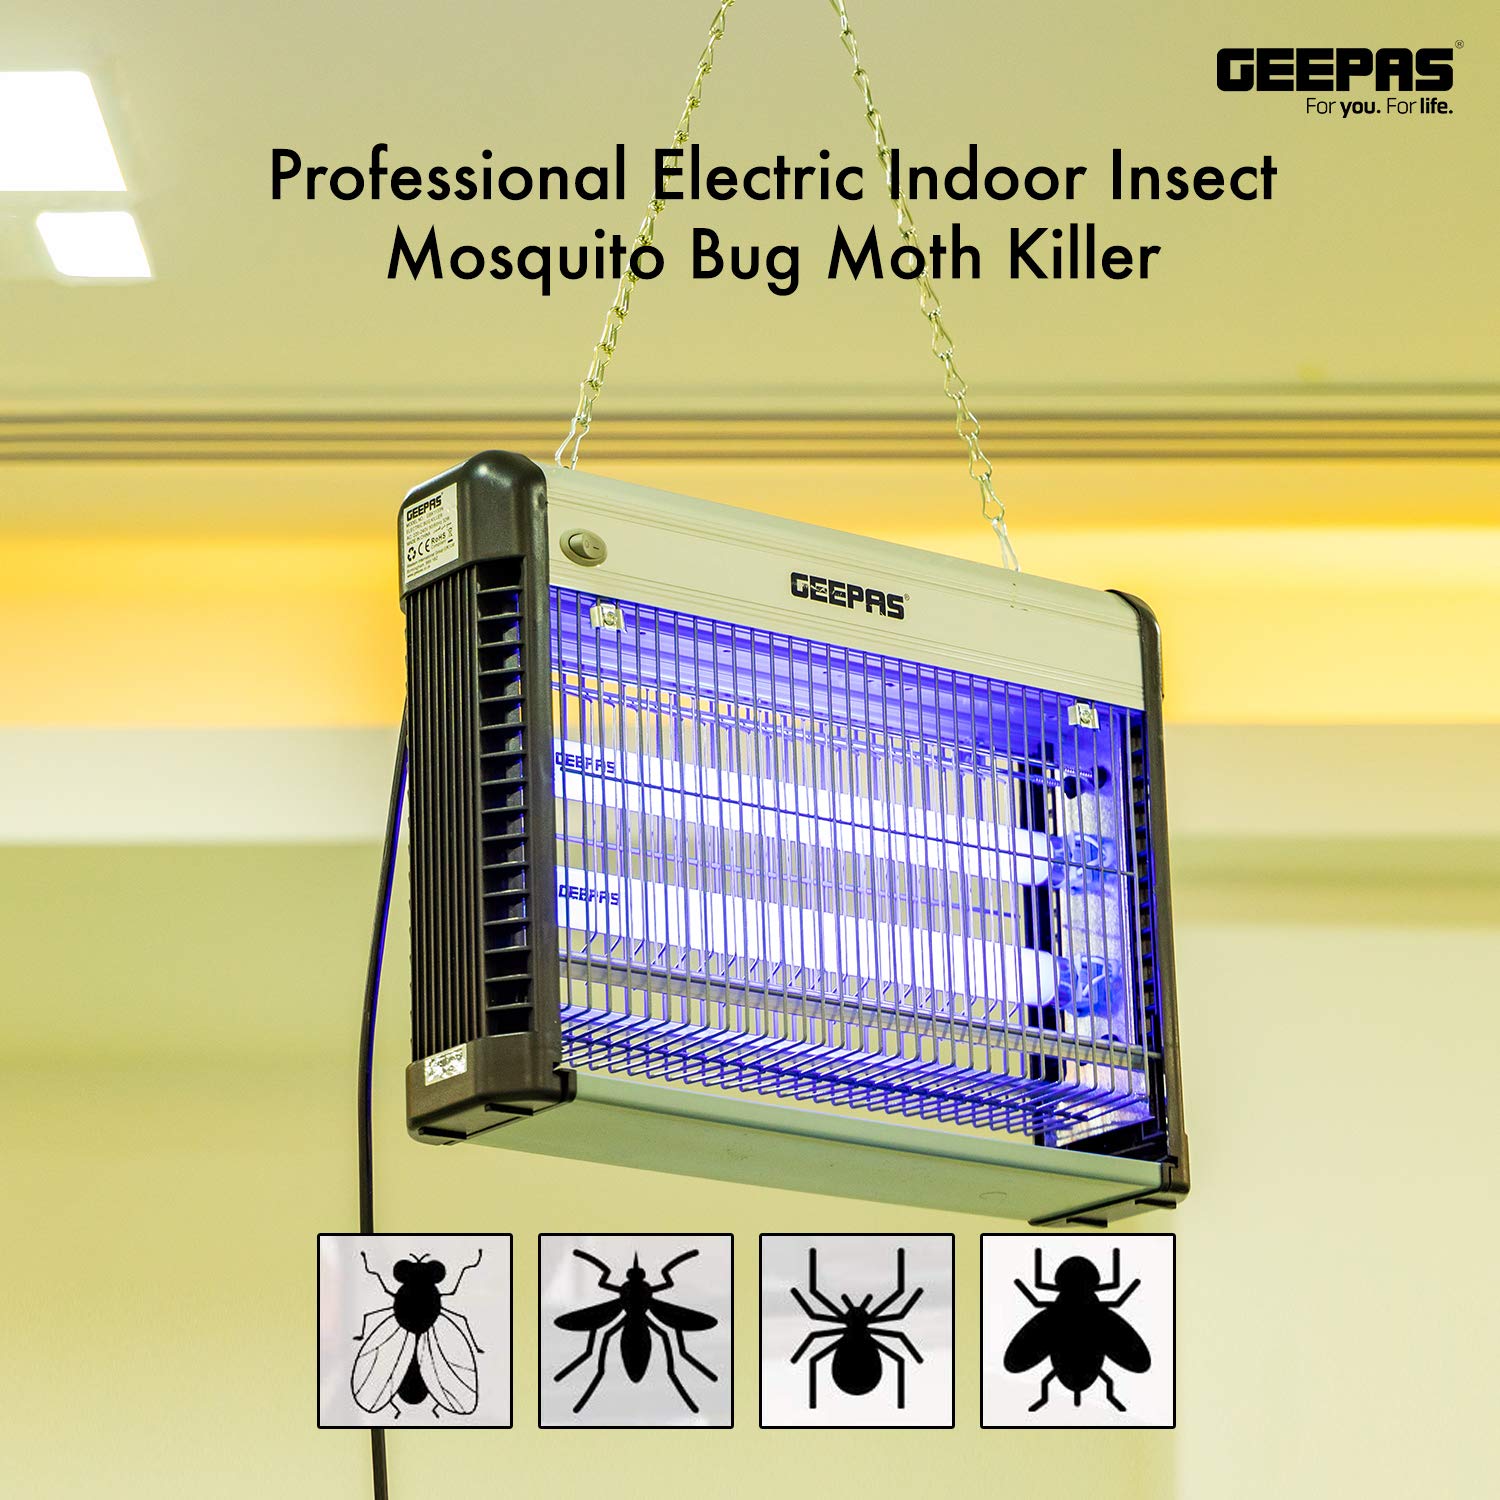 Geepas Fly and Insect Killer | Powerful Fly Zapper 20W UV Light | Professional Electric Bug Zapper, Insect Killer, Fly Killer, Wasp Killer | Insect Killing Mesh Grid, with Detachable Hang| 1 Year Warr